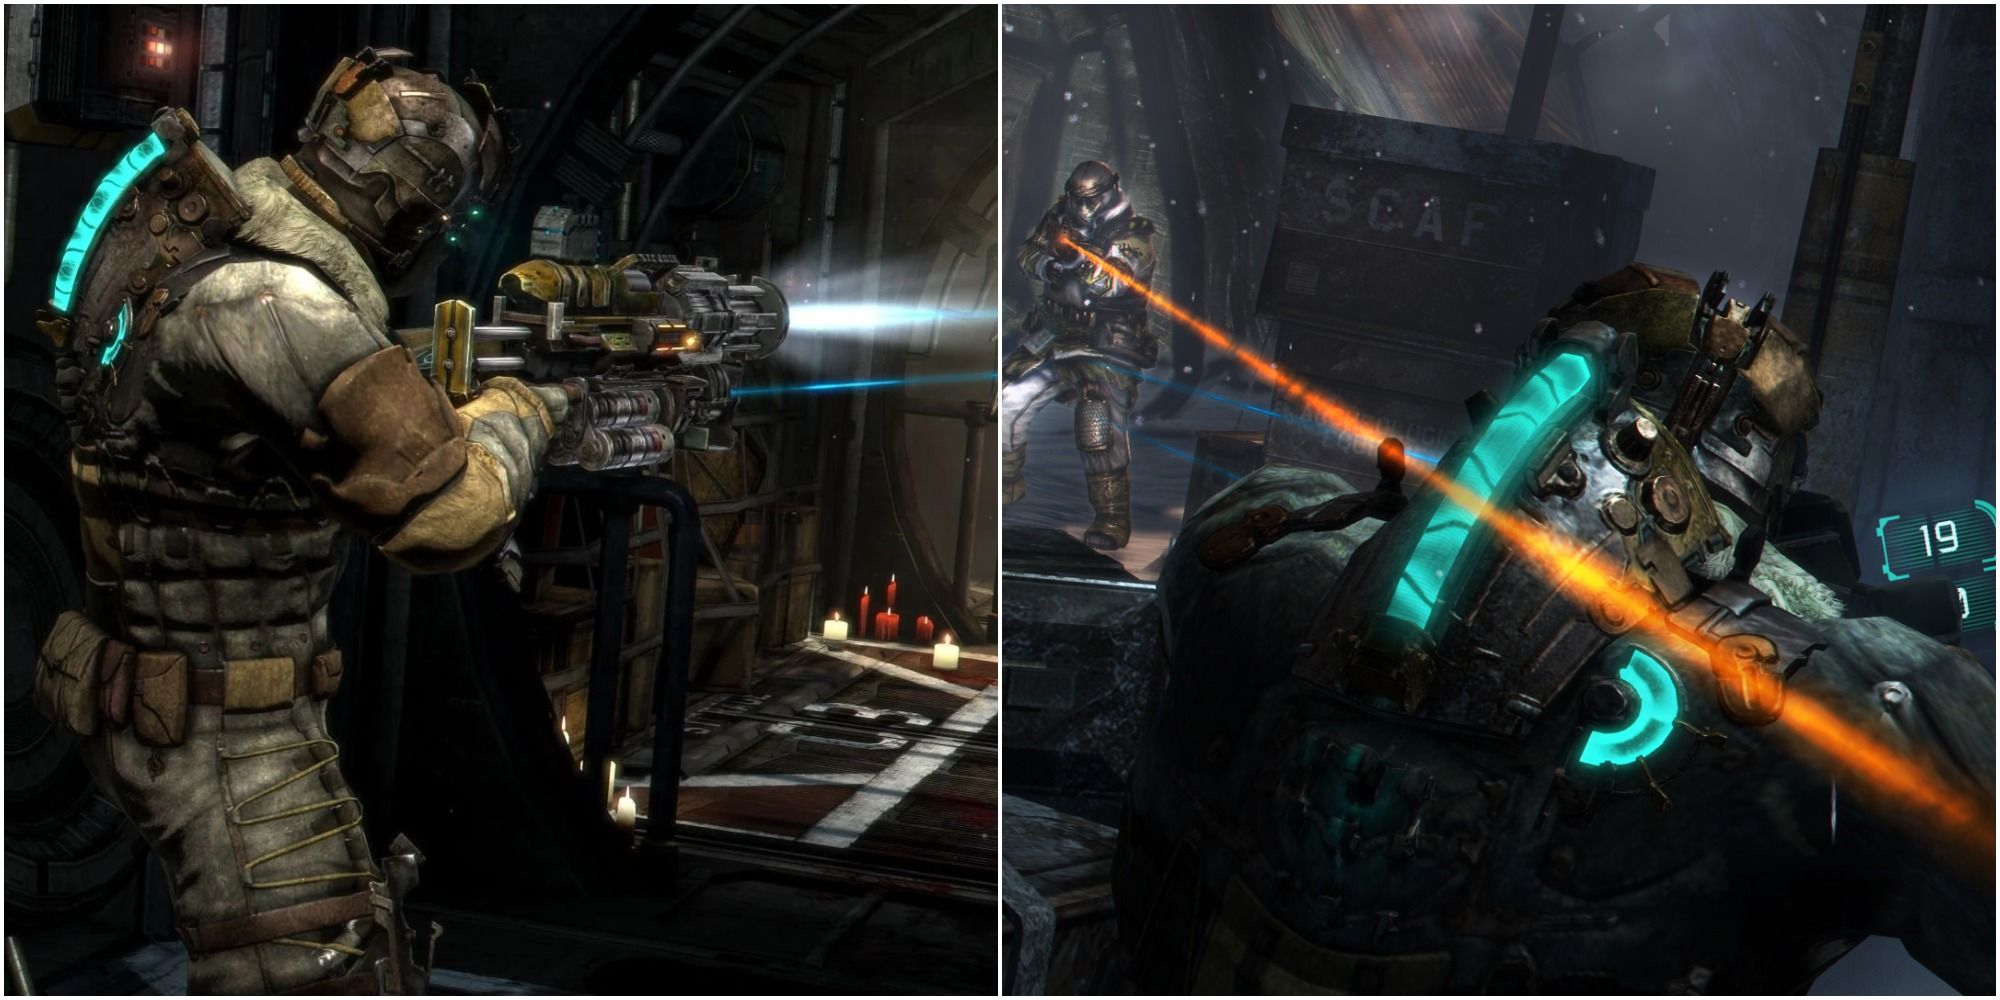 The 'Dead Space' Franchise Ranked, Including Main Games, Spinoffs